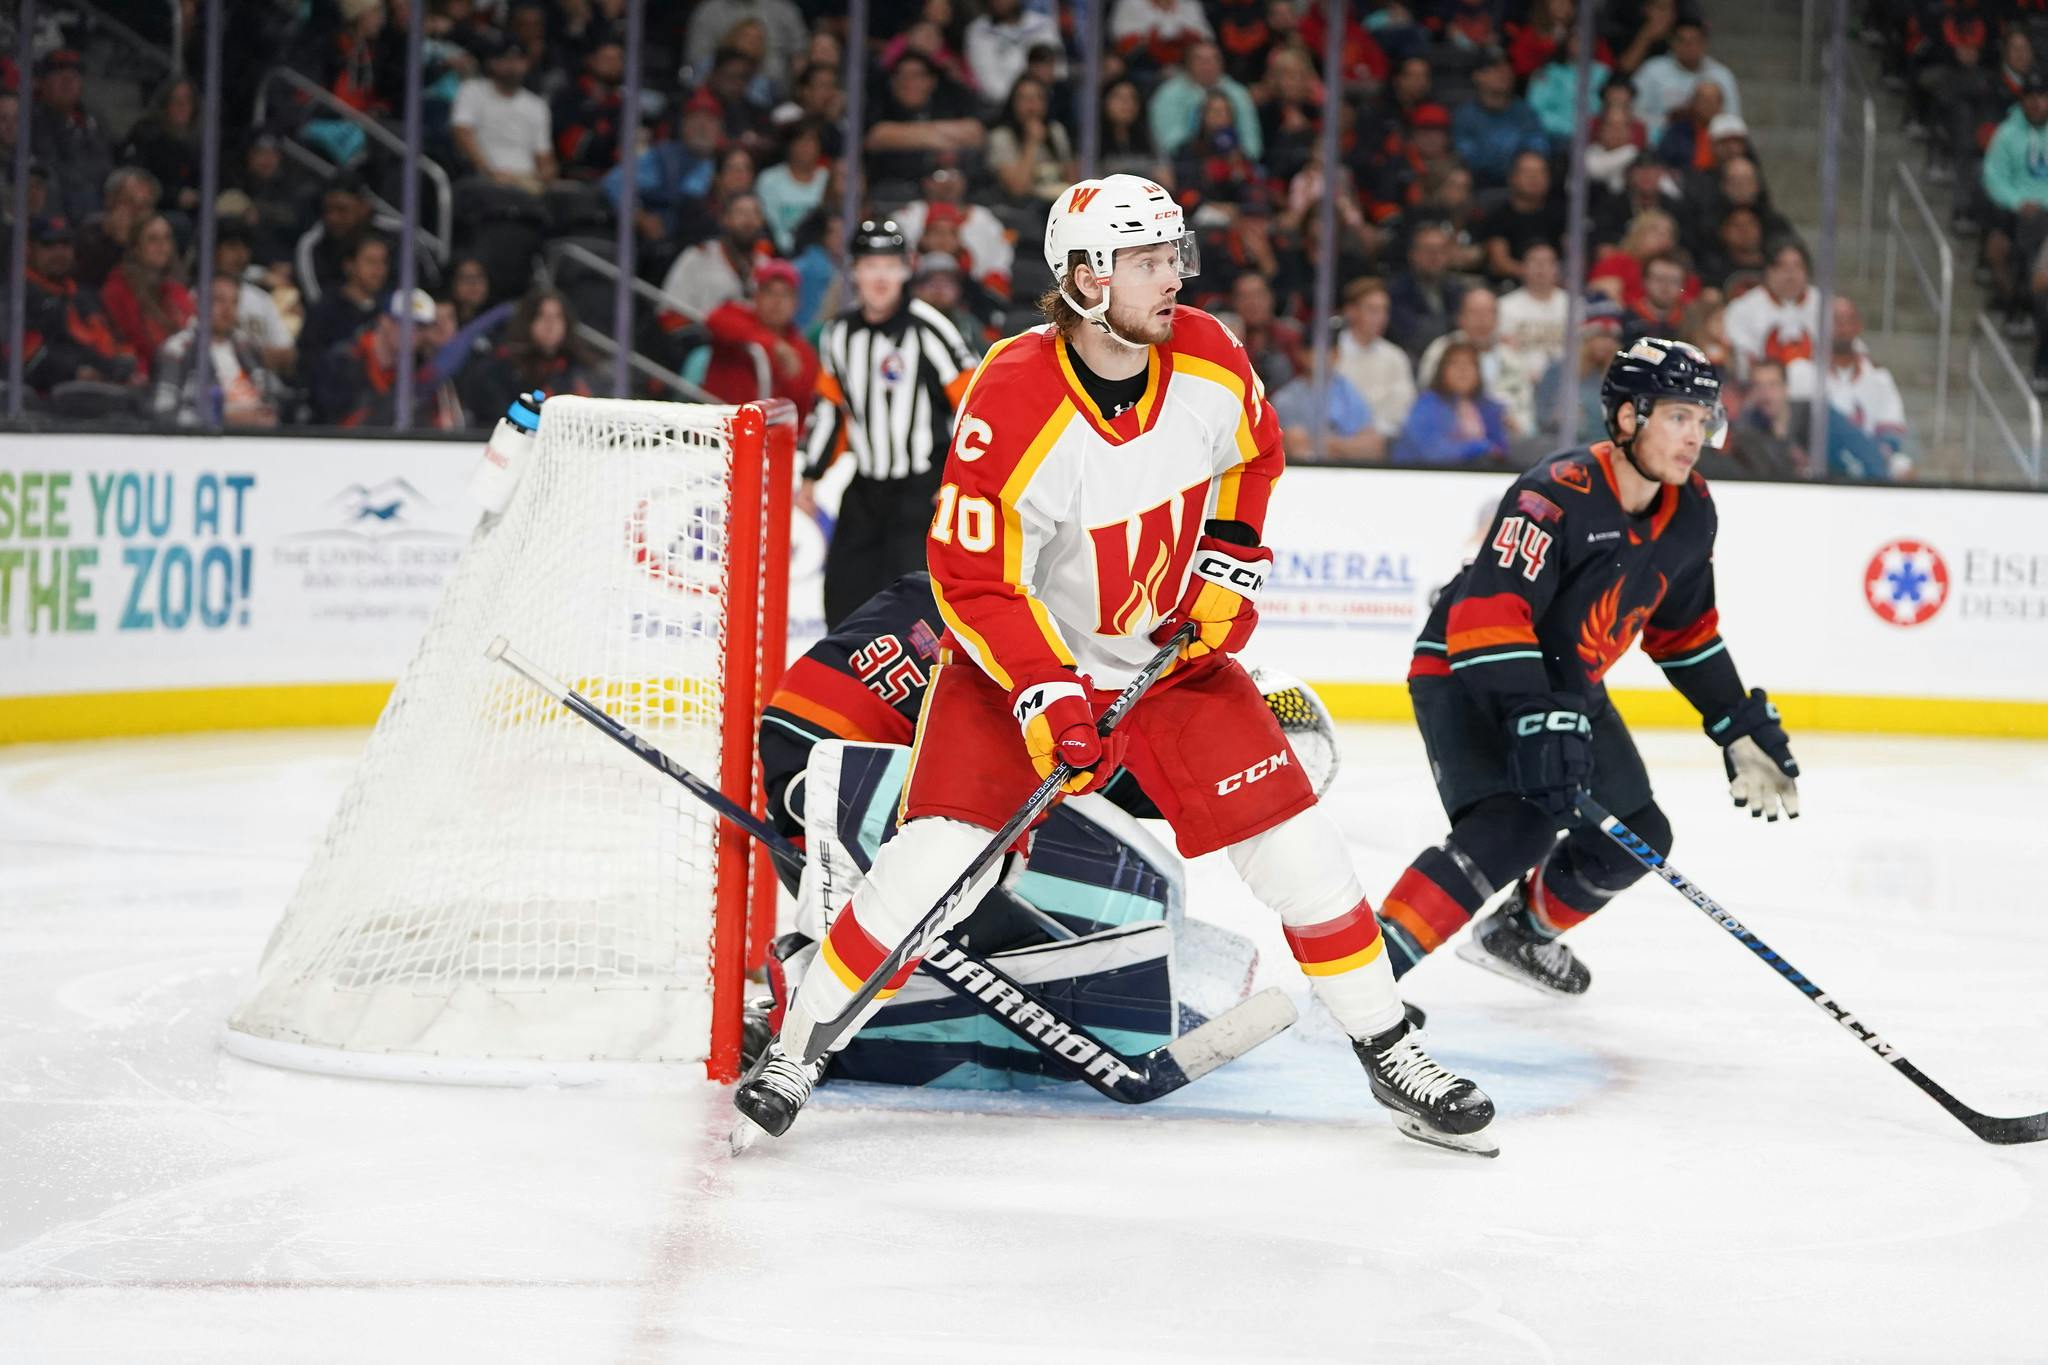 Everything you need to know about the Calgary Wranglers before the AHL  playoffs - FlamesNation